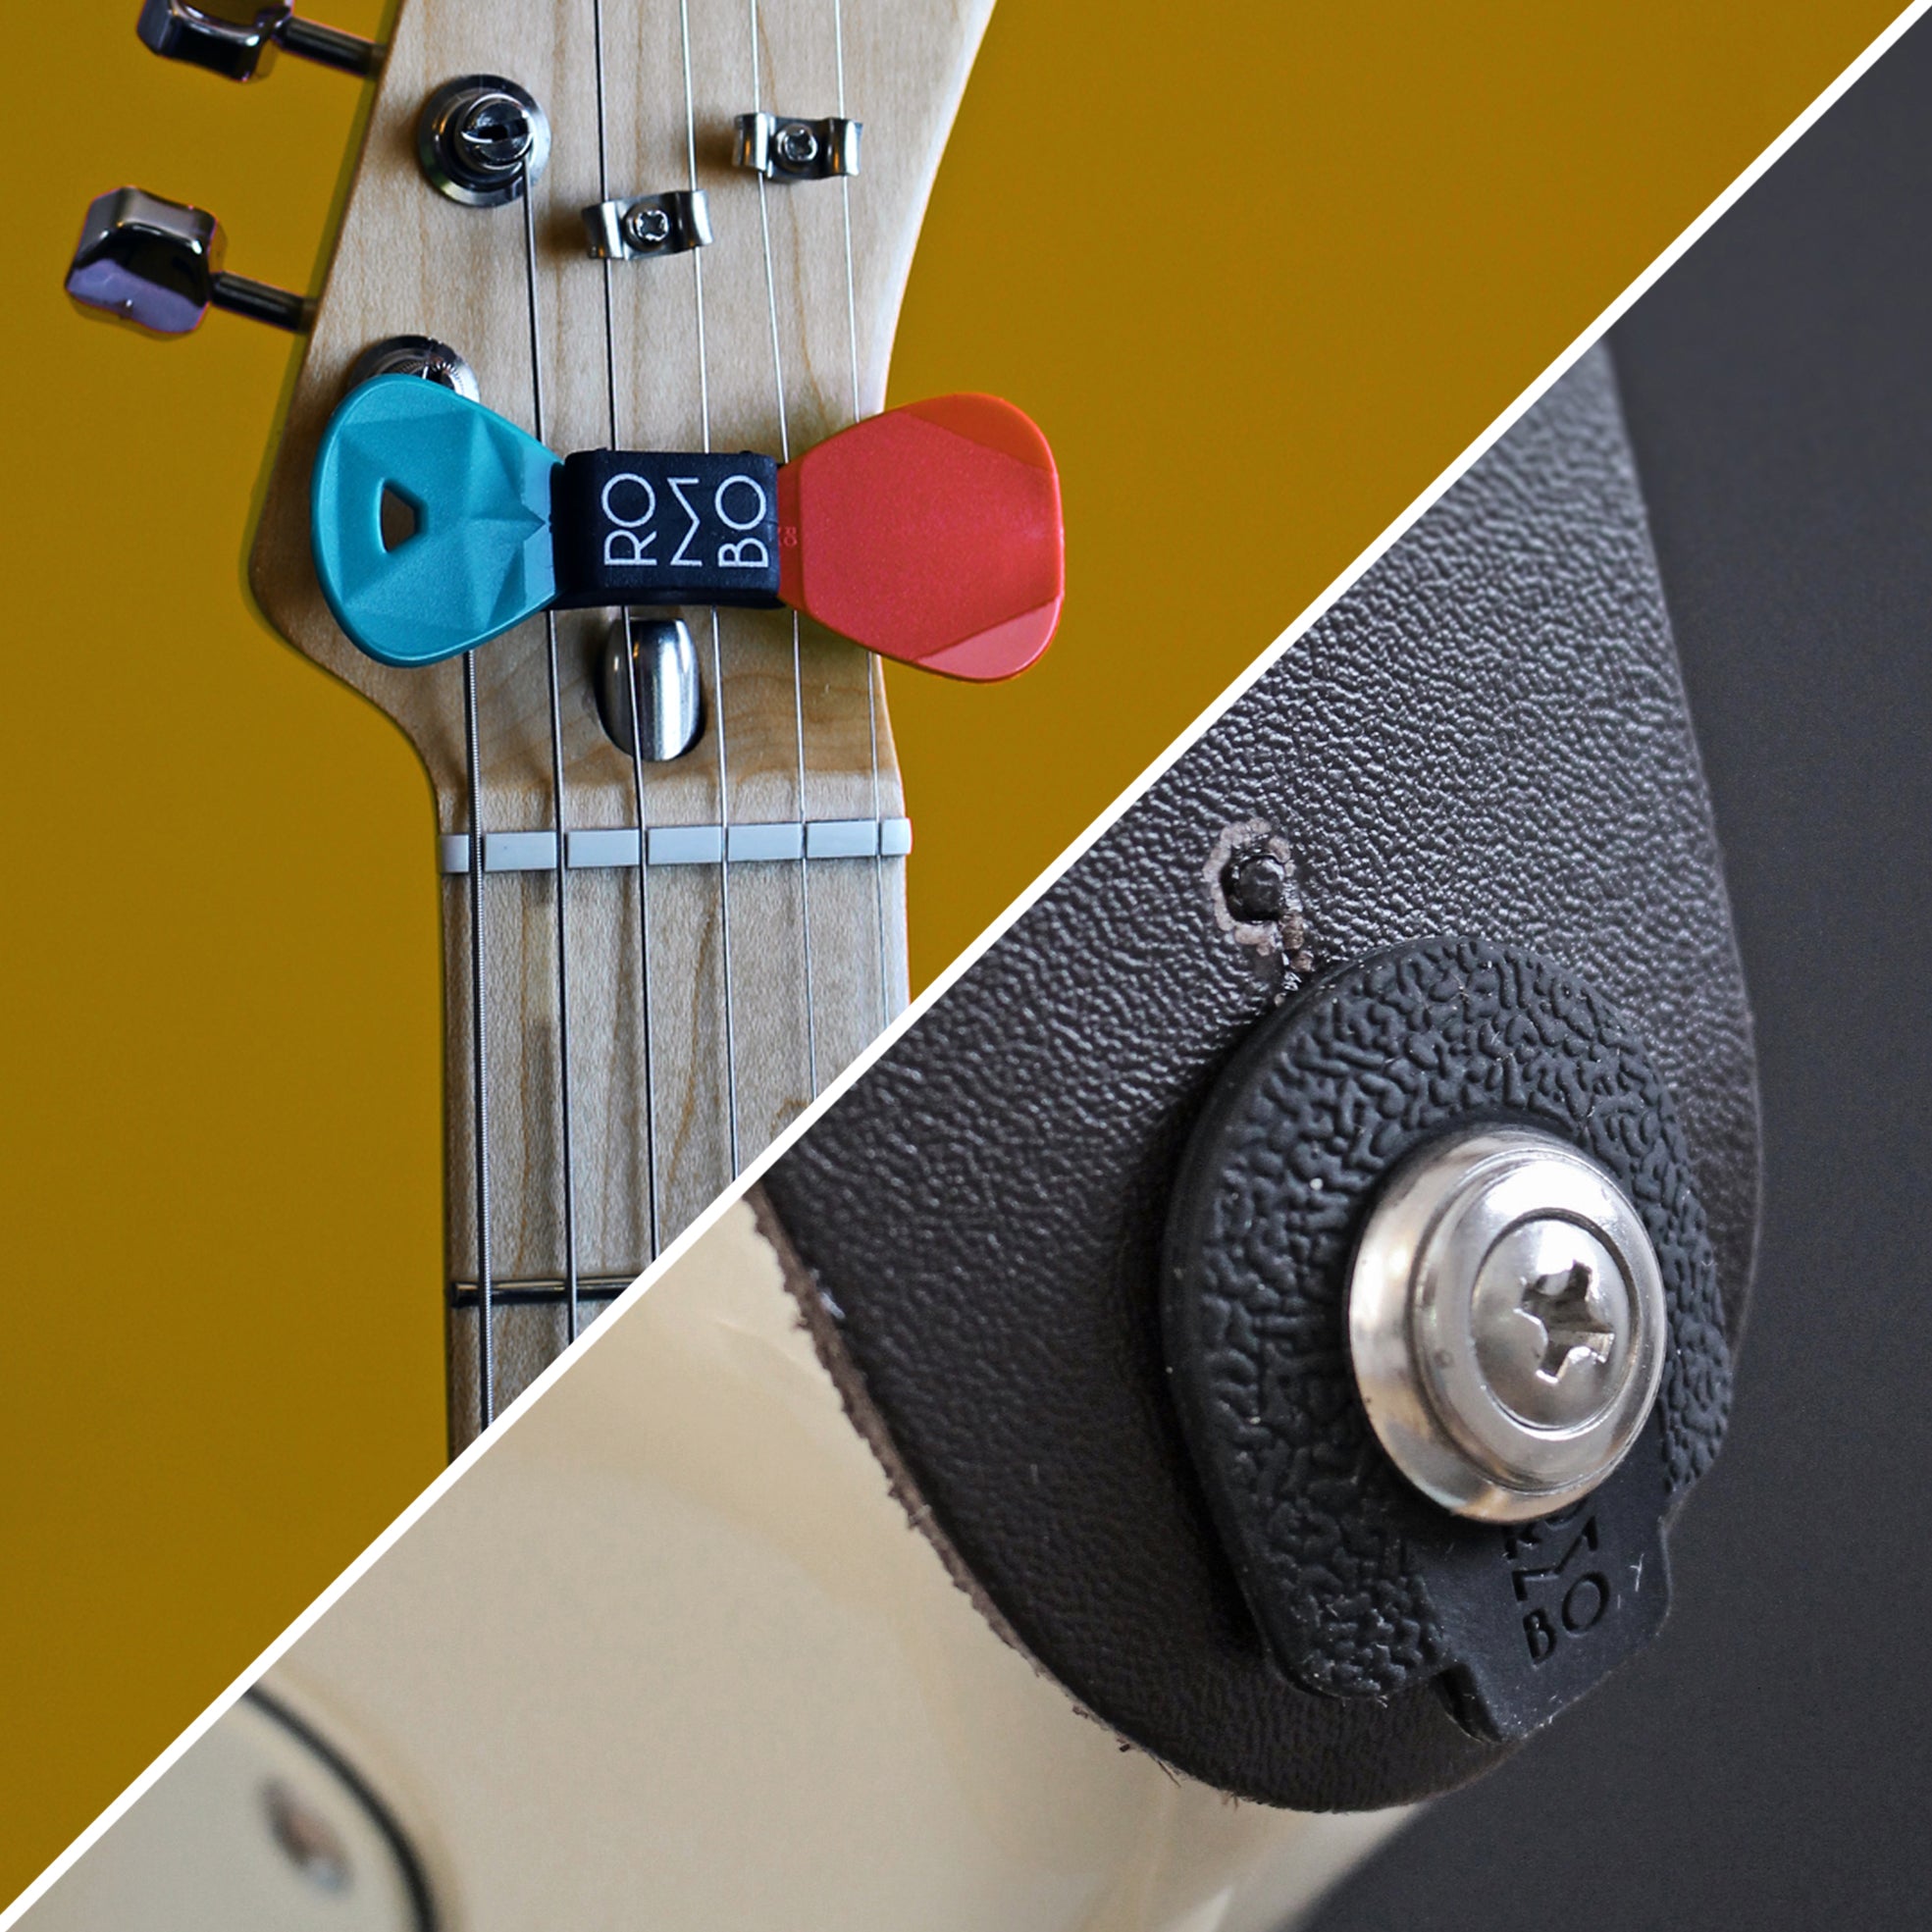 Other Guitar Accessories